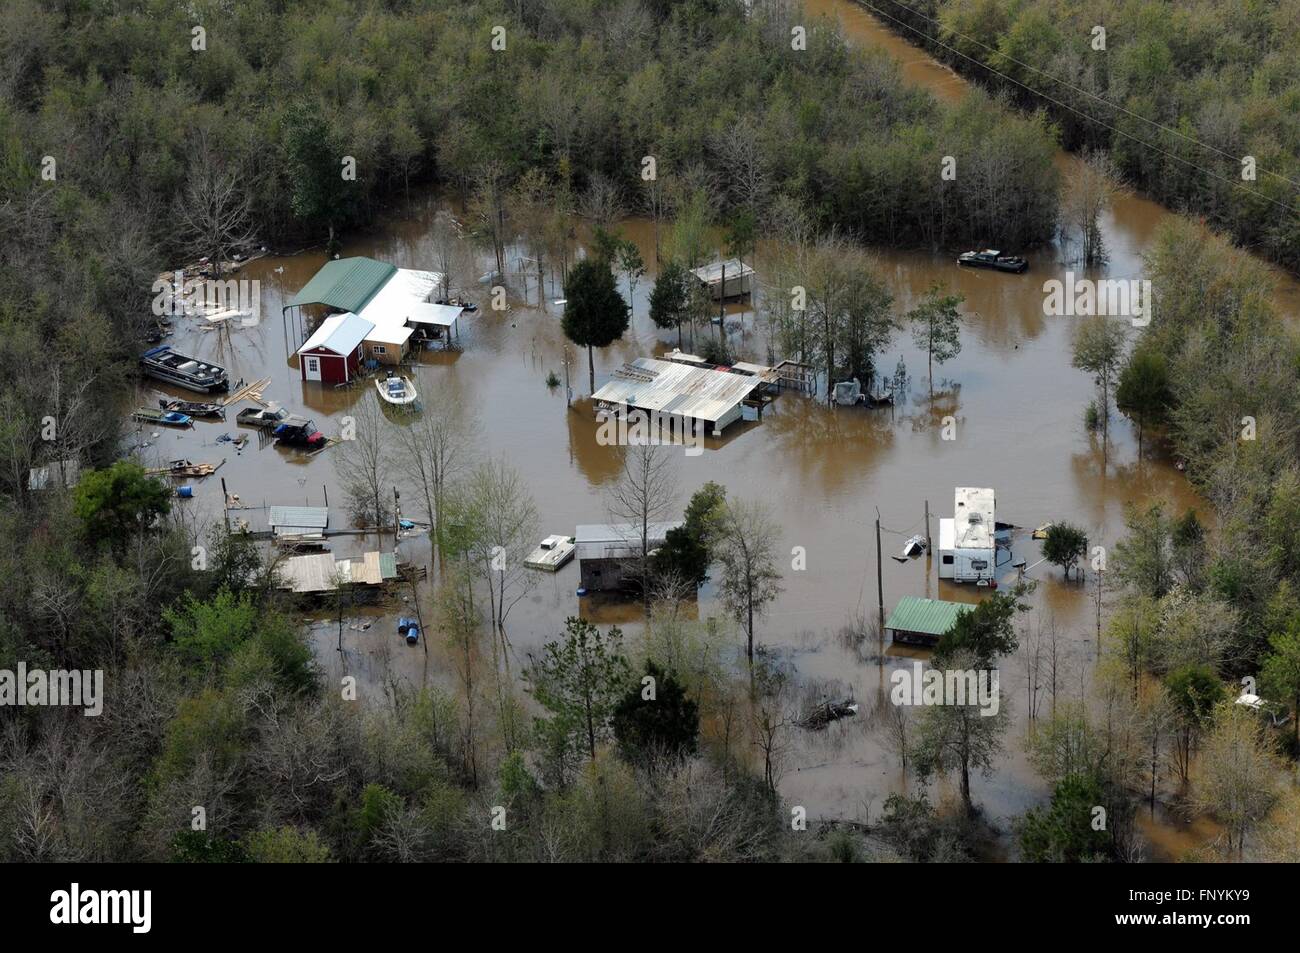 Aerial view of homes submerged in floodwaters along the Pearl and Leaf Rivers after record breaking storms dumped rain across the deep south March 13, 2016 in St. Tammany Parish, Louisiana. Stock Photo